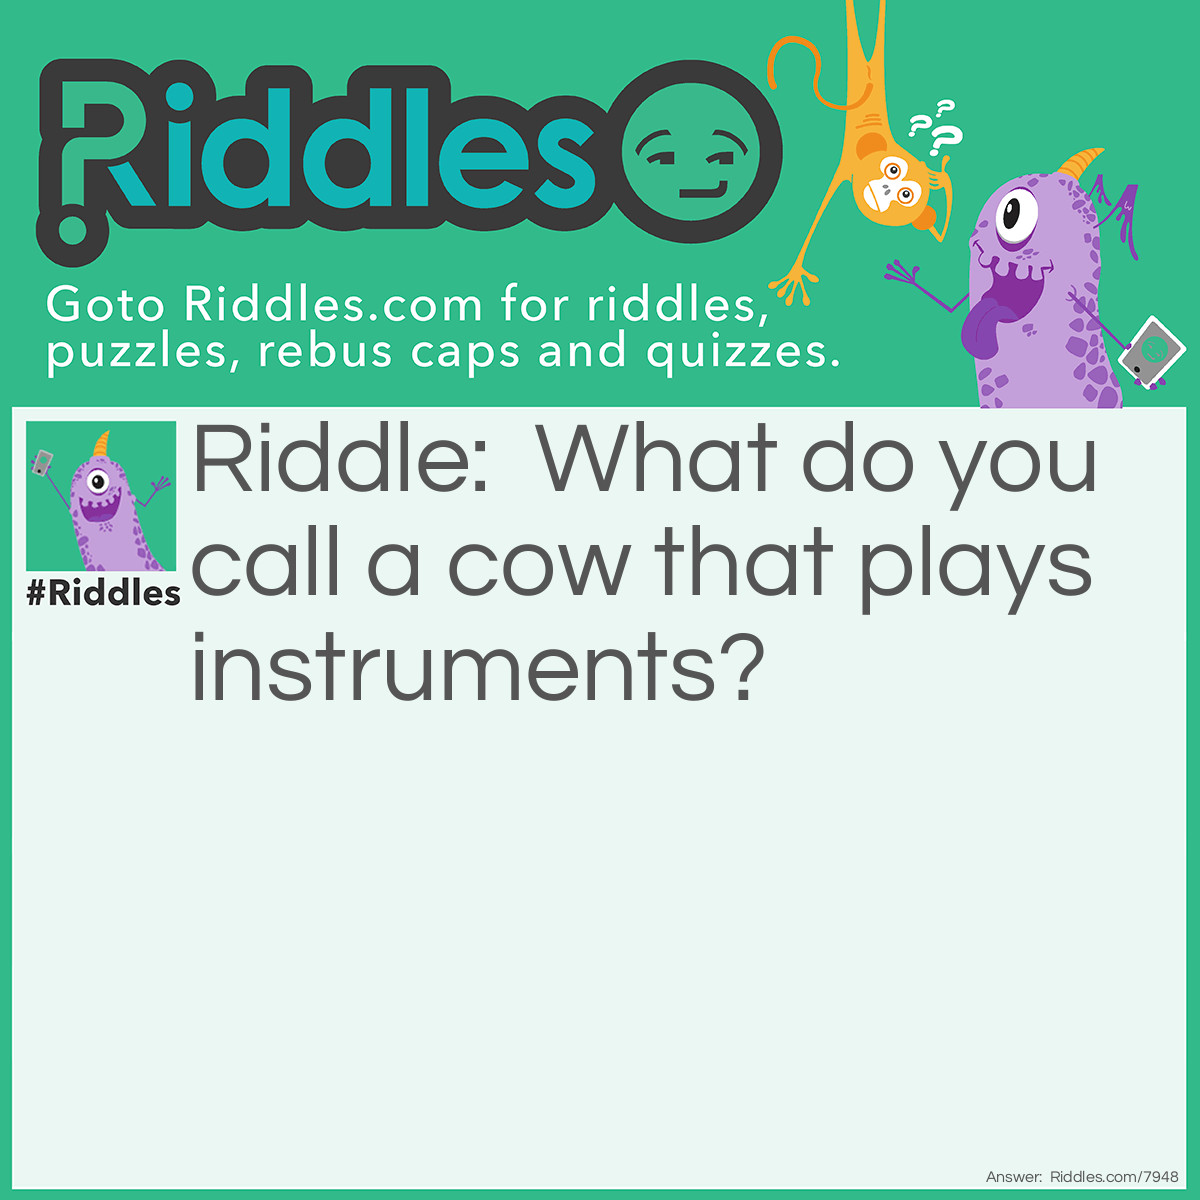 Riddle: What do you call a cow that plays instruments? Answer: A moo-sician!